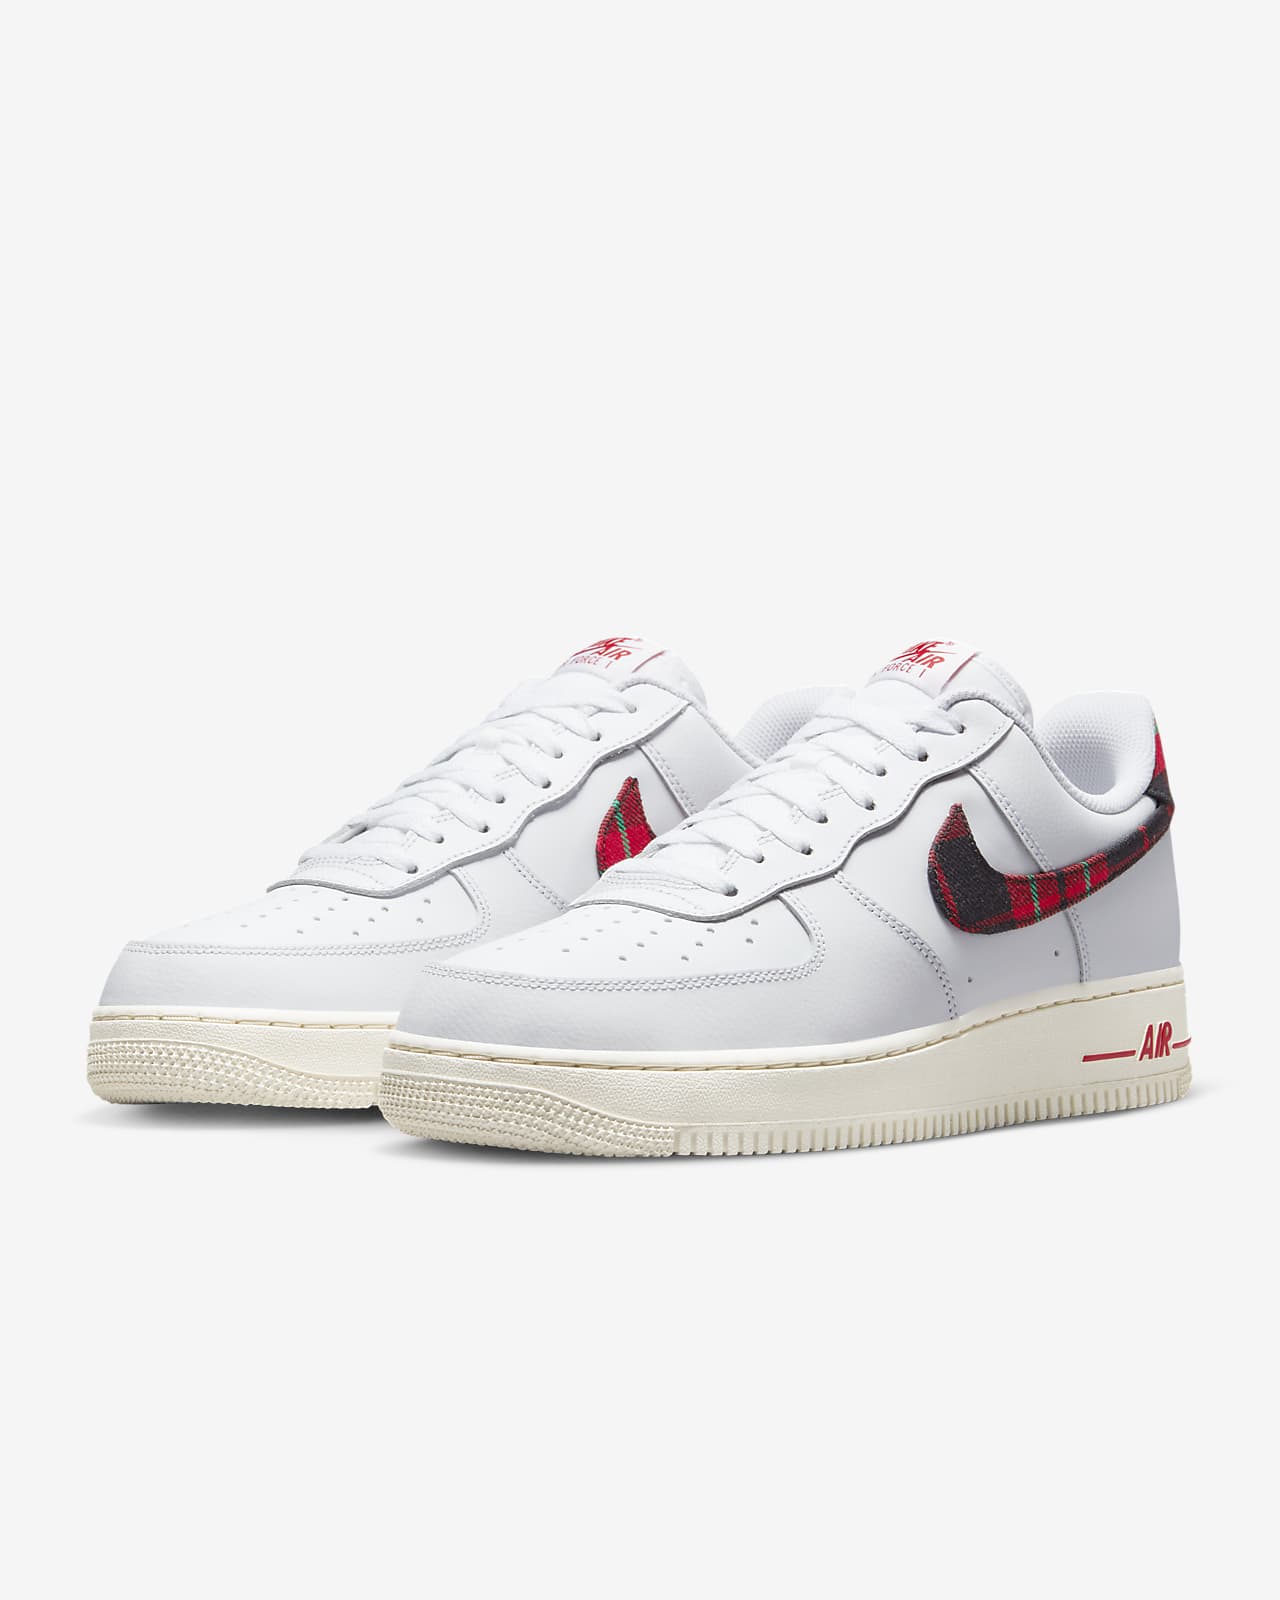 Nike Air Force 1 LV8 Men's Shoes.